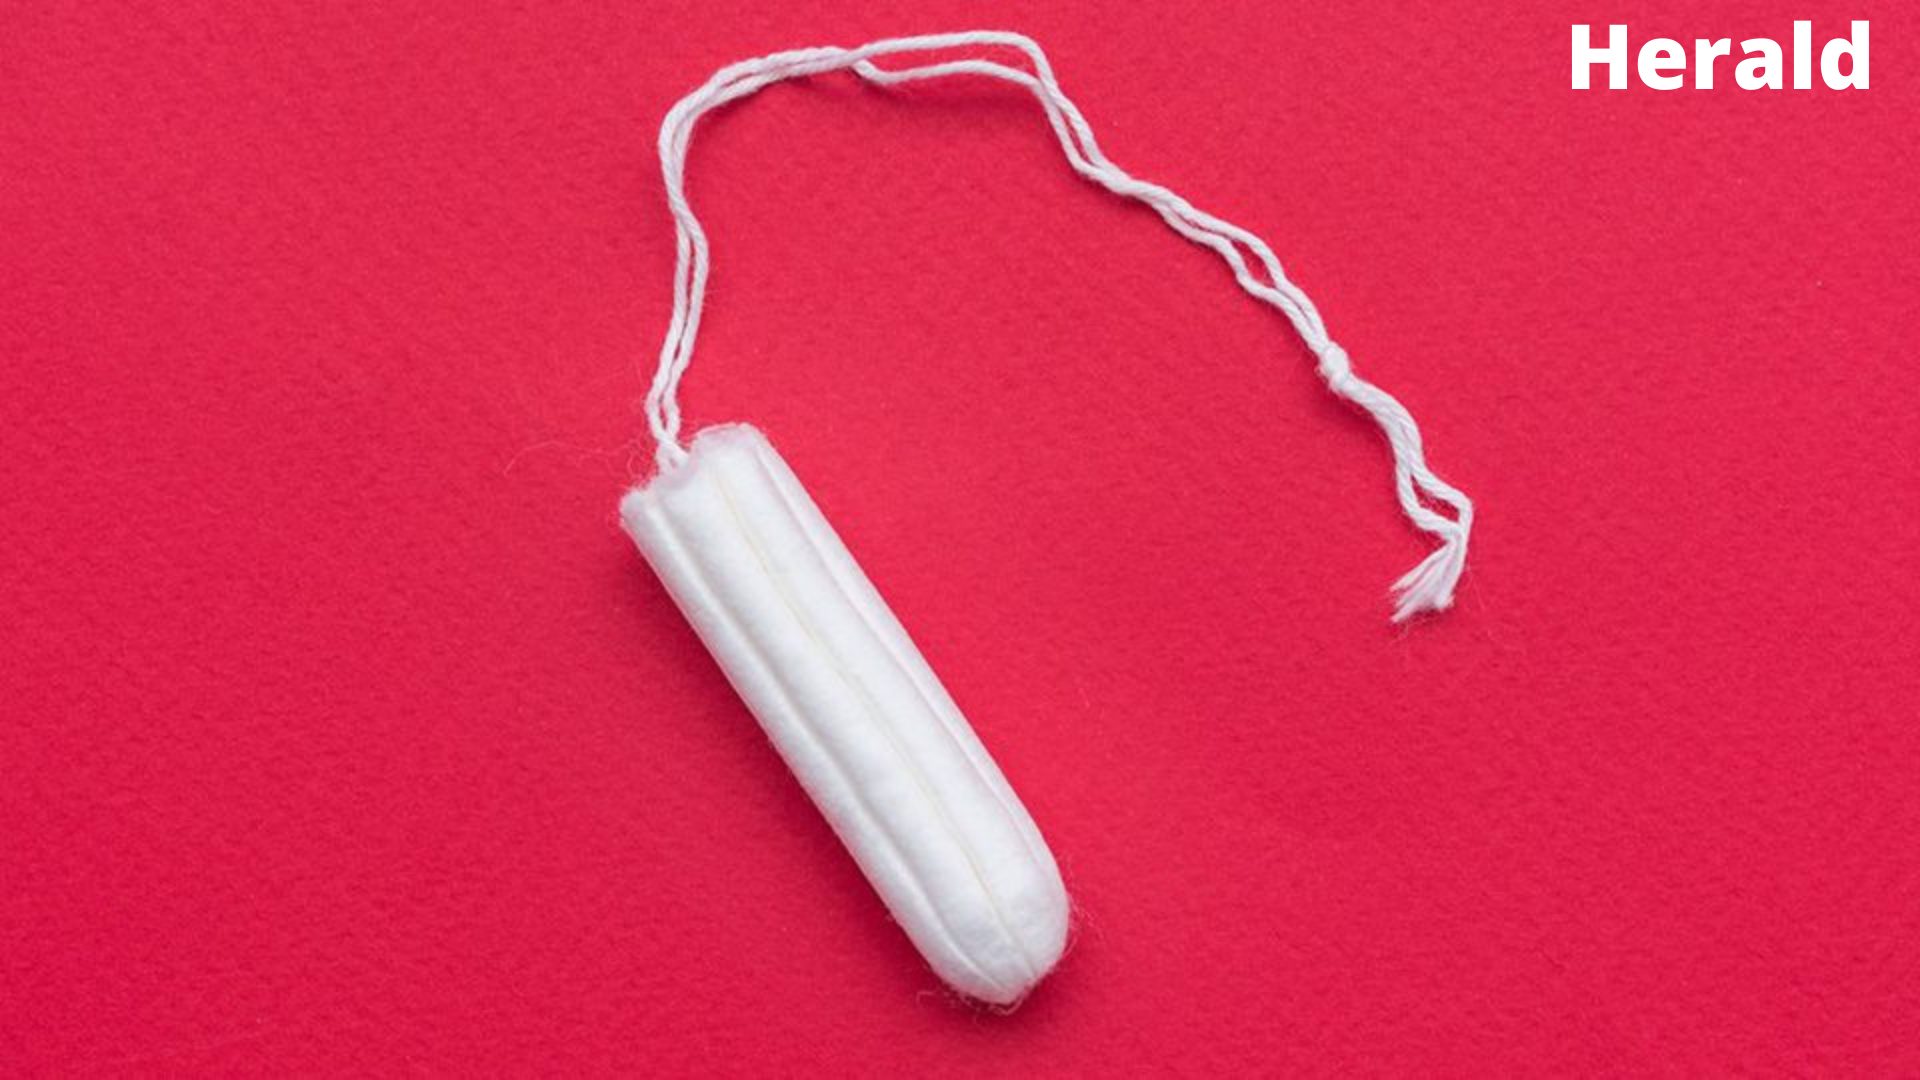 How to put a Tampon On